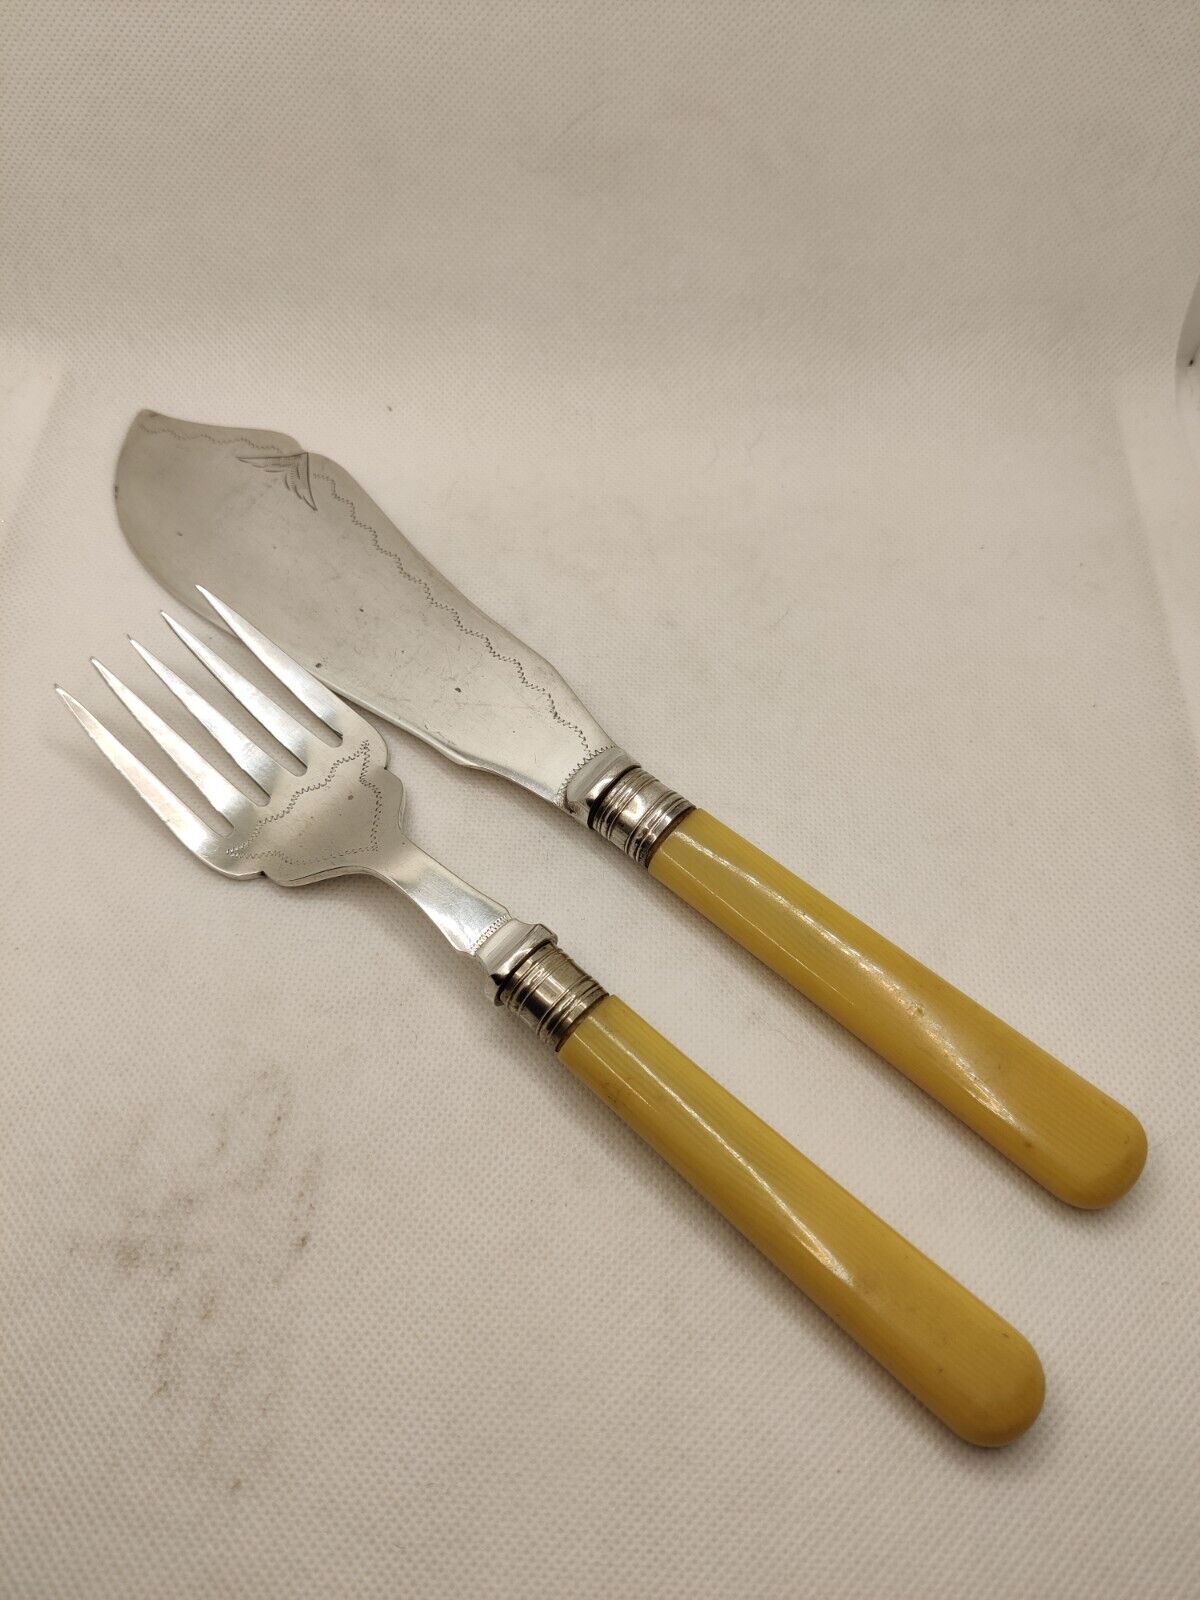 Vintage Silver Plated Serving Fish Knife and Fork Set | Faux Bone Handle